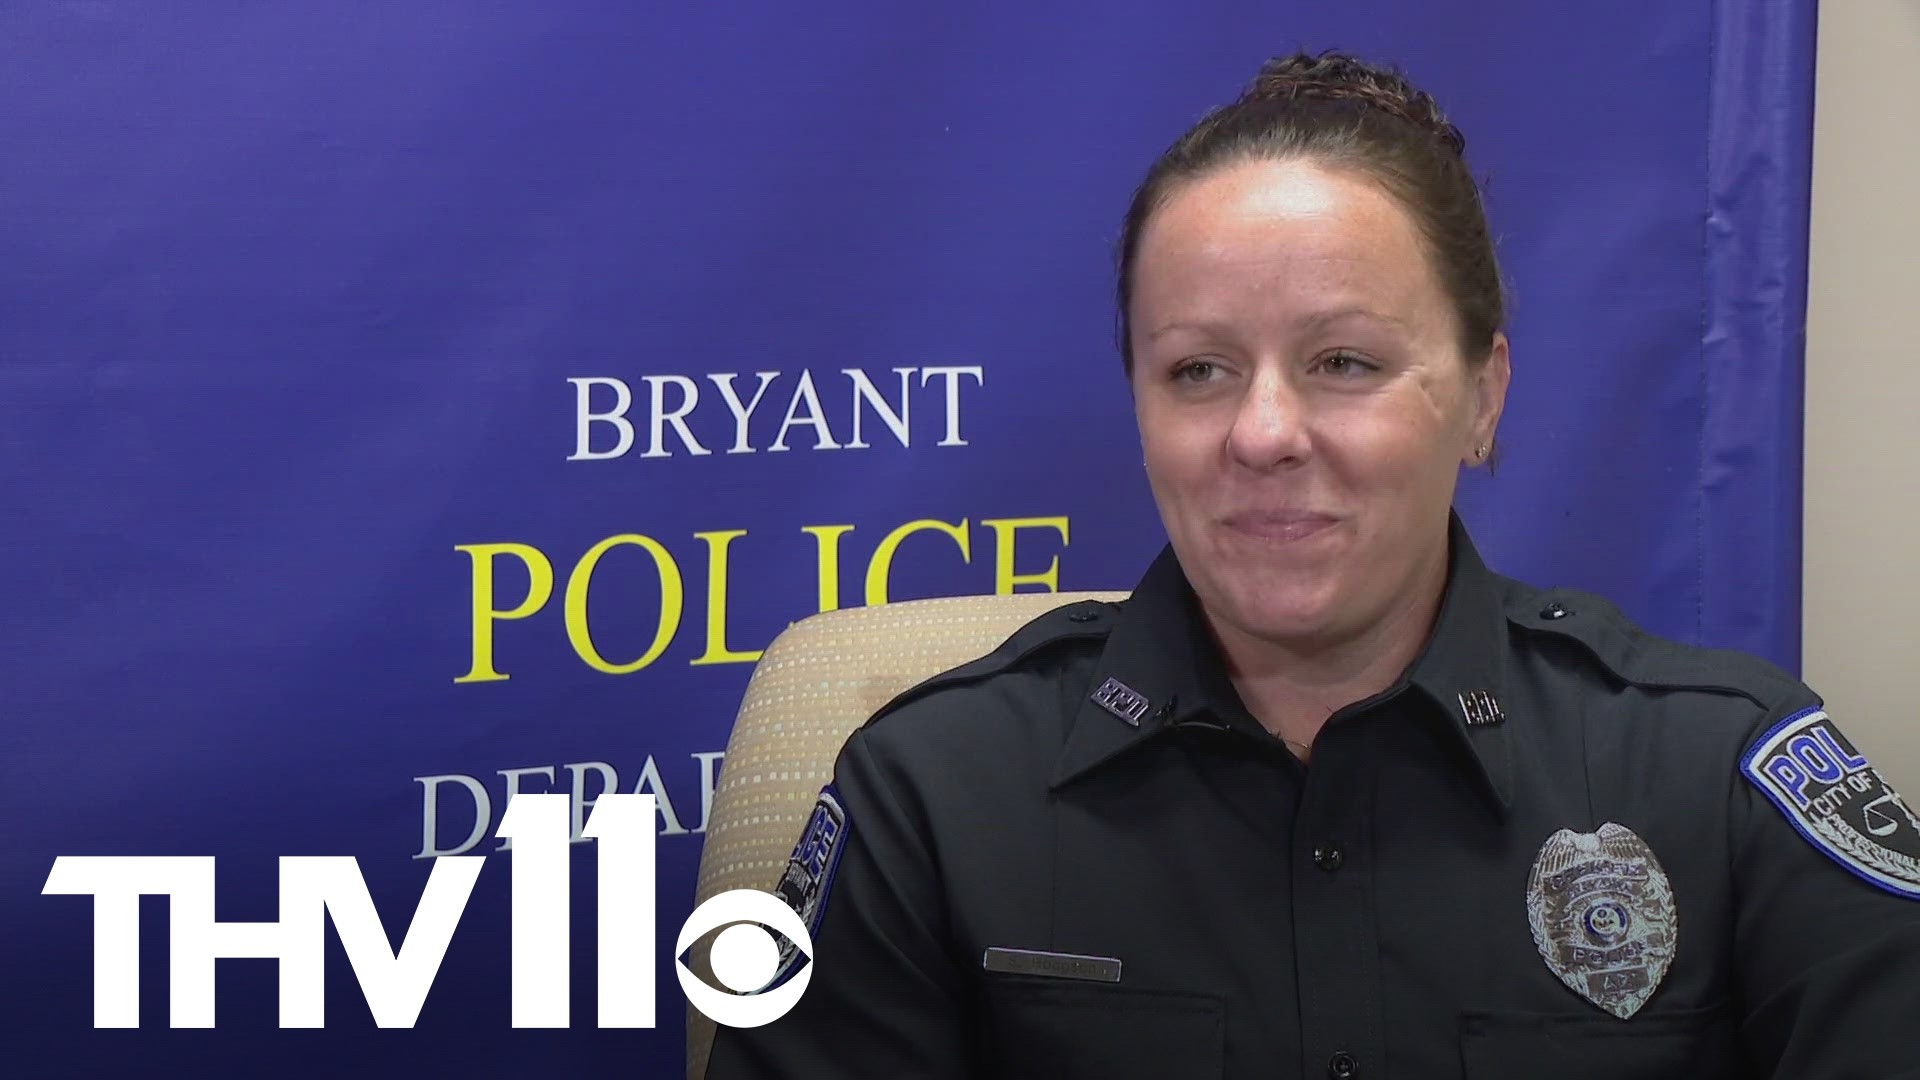 A Bryant police officer is celebrating 5 years on the force this week, but she's also sharing how she has turned her own pain into strength to serve her community.